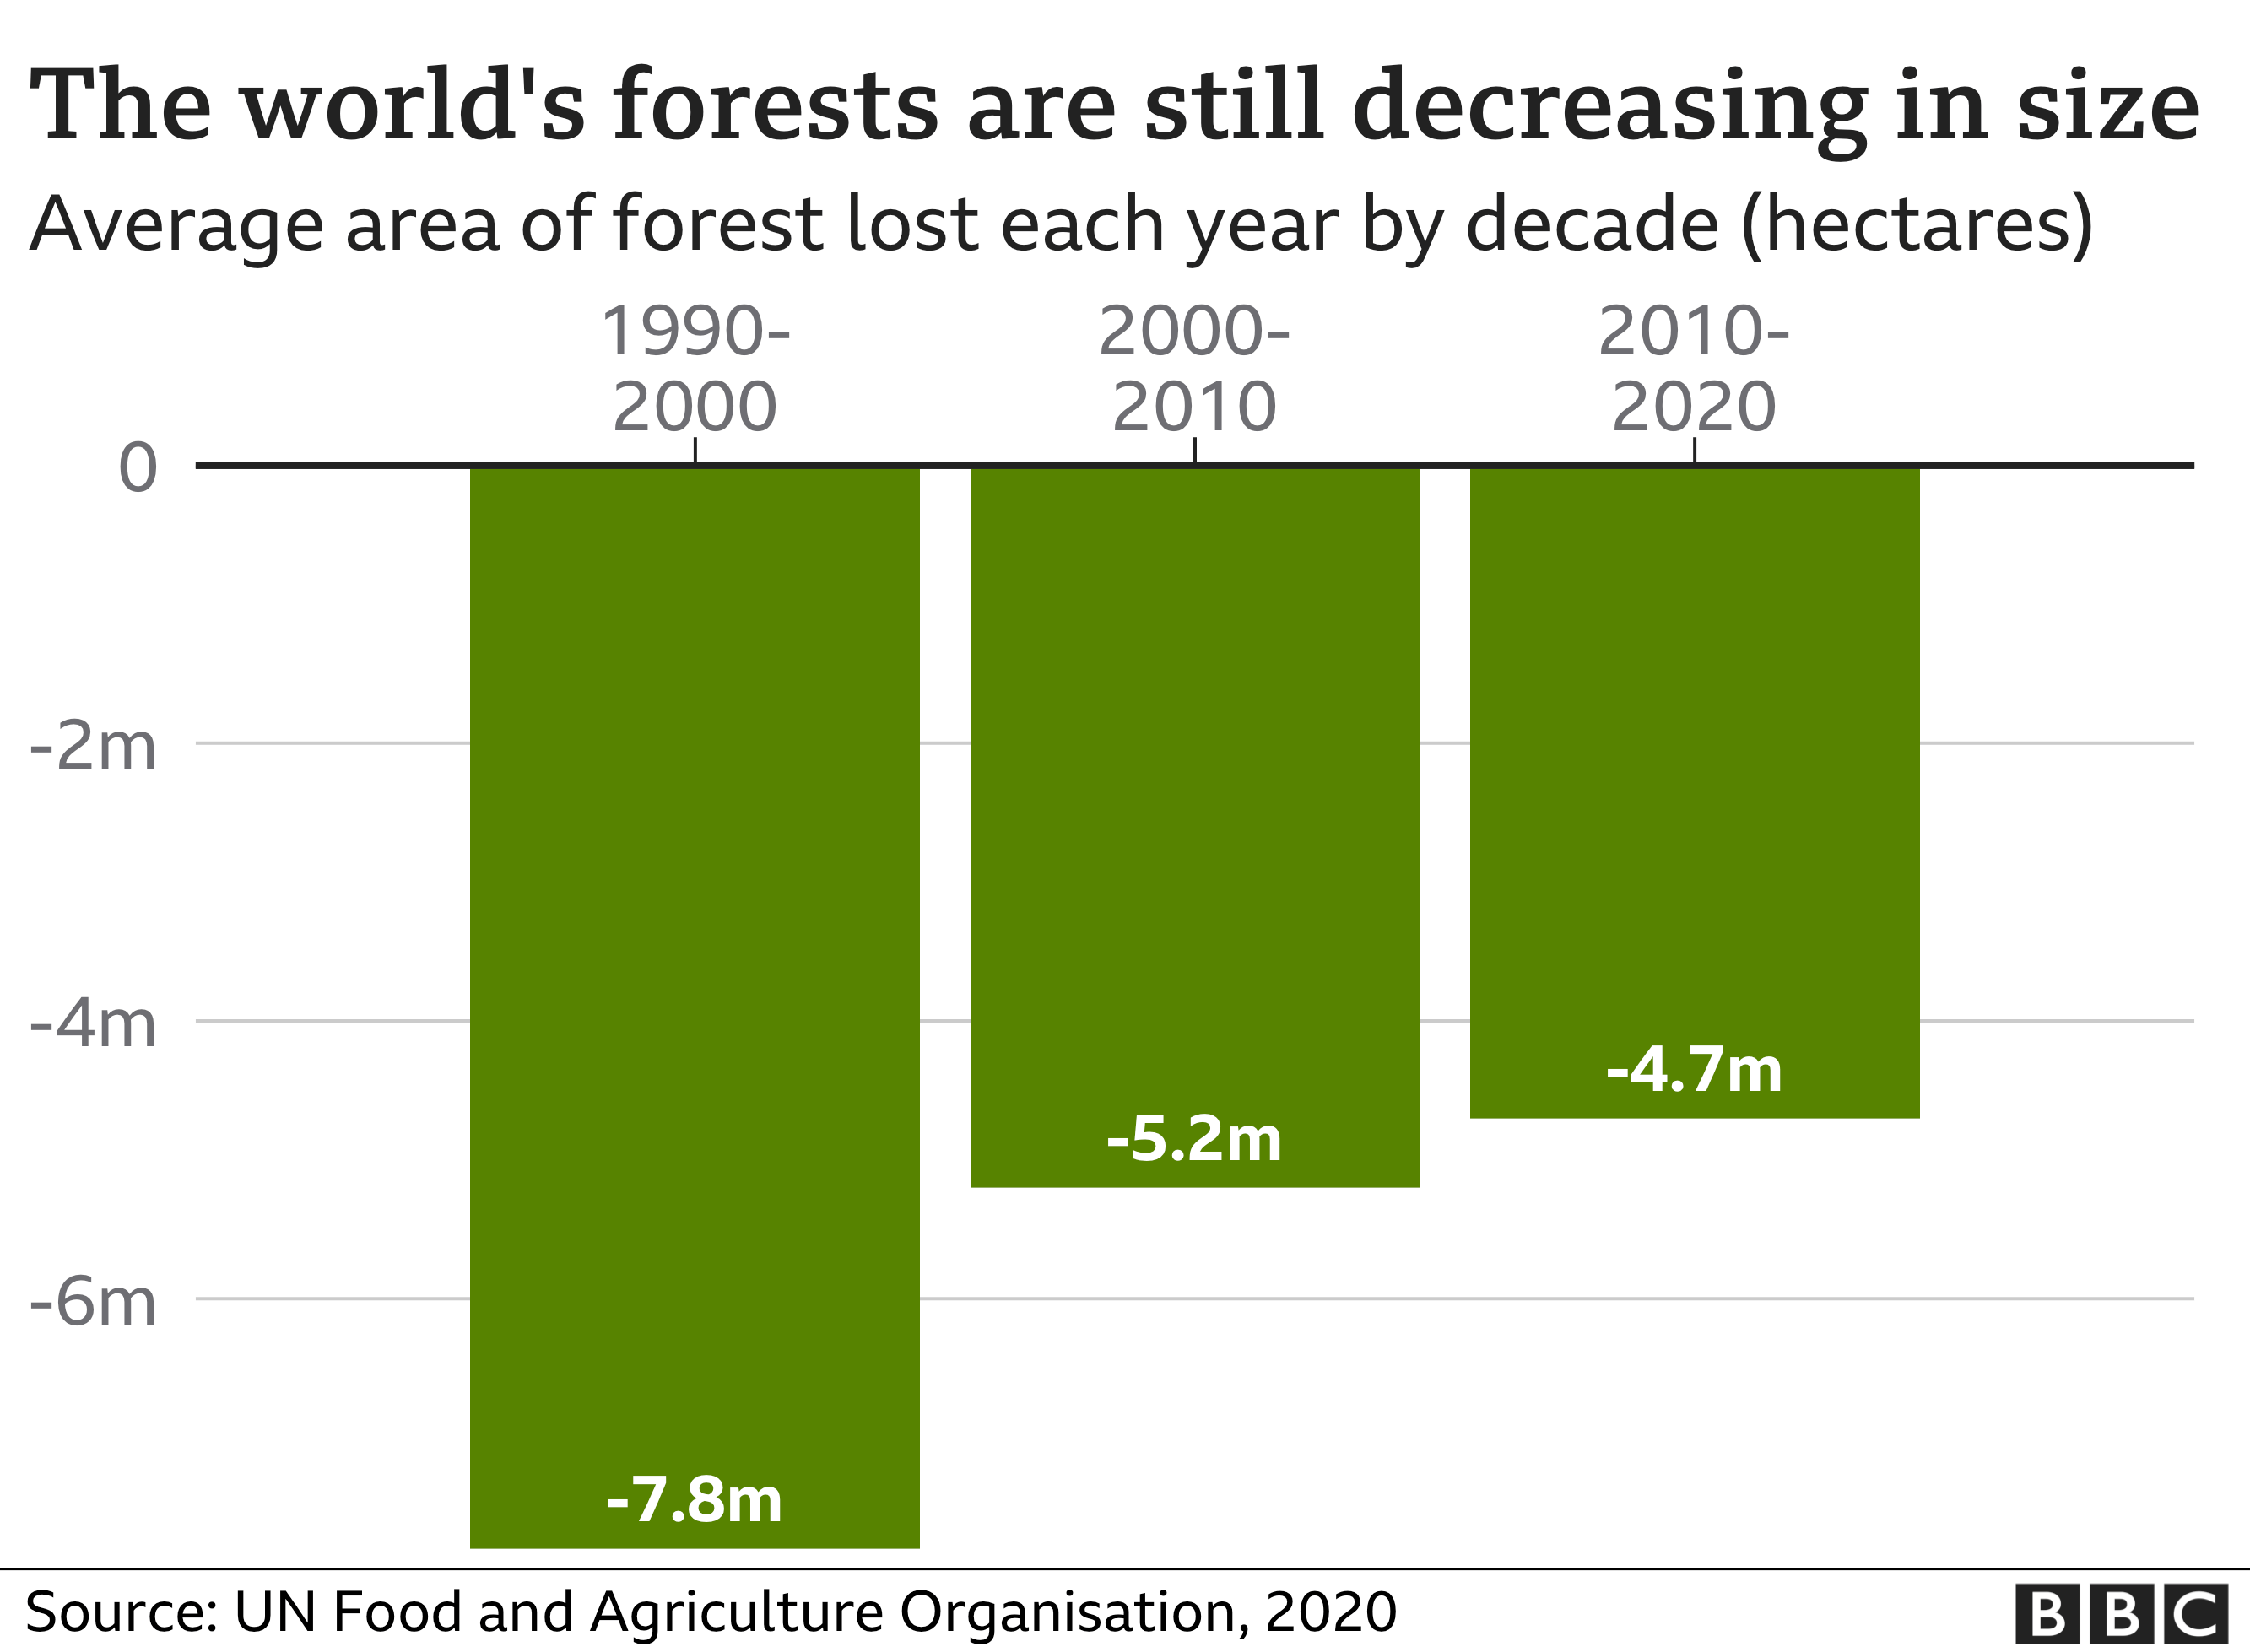 Graphic showing how the world's forest area has decreased since 1990.